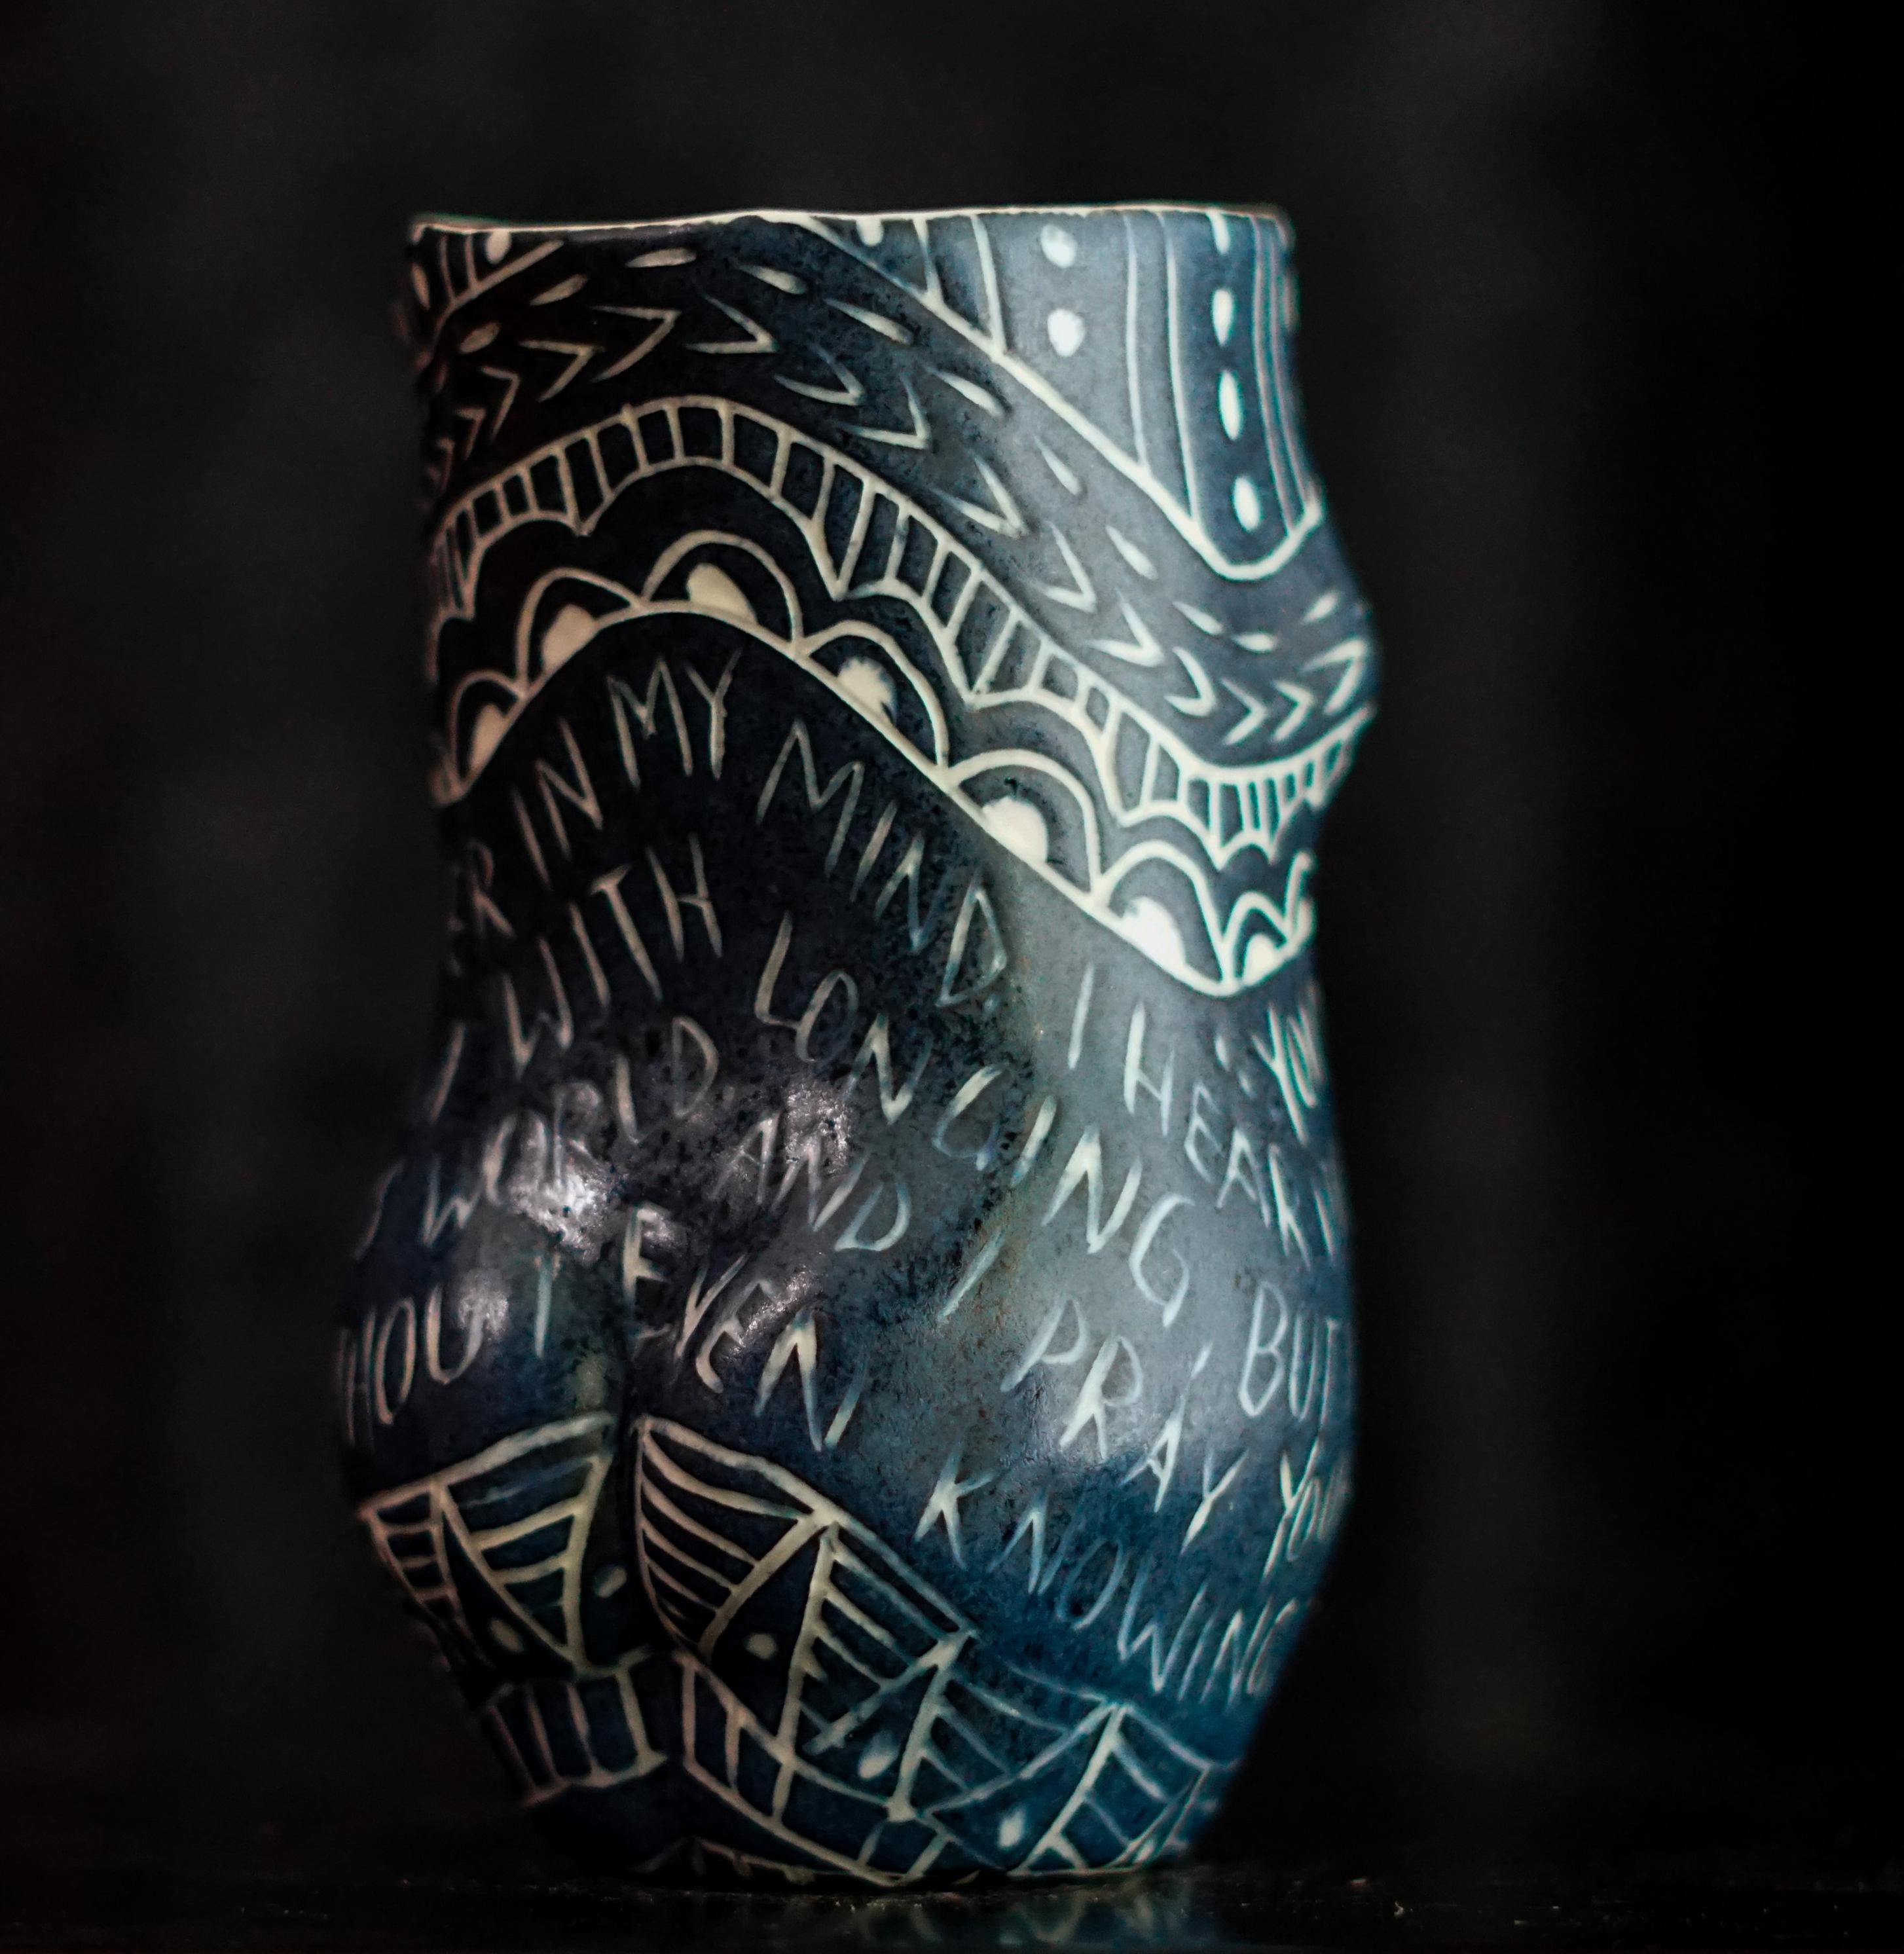 “Your Name Plays...” Porcelain cup with sgraffito detailing - Sculpture by Alex Hodge